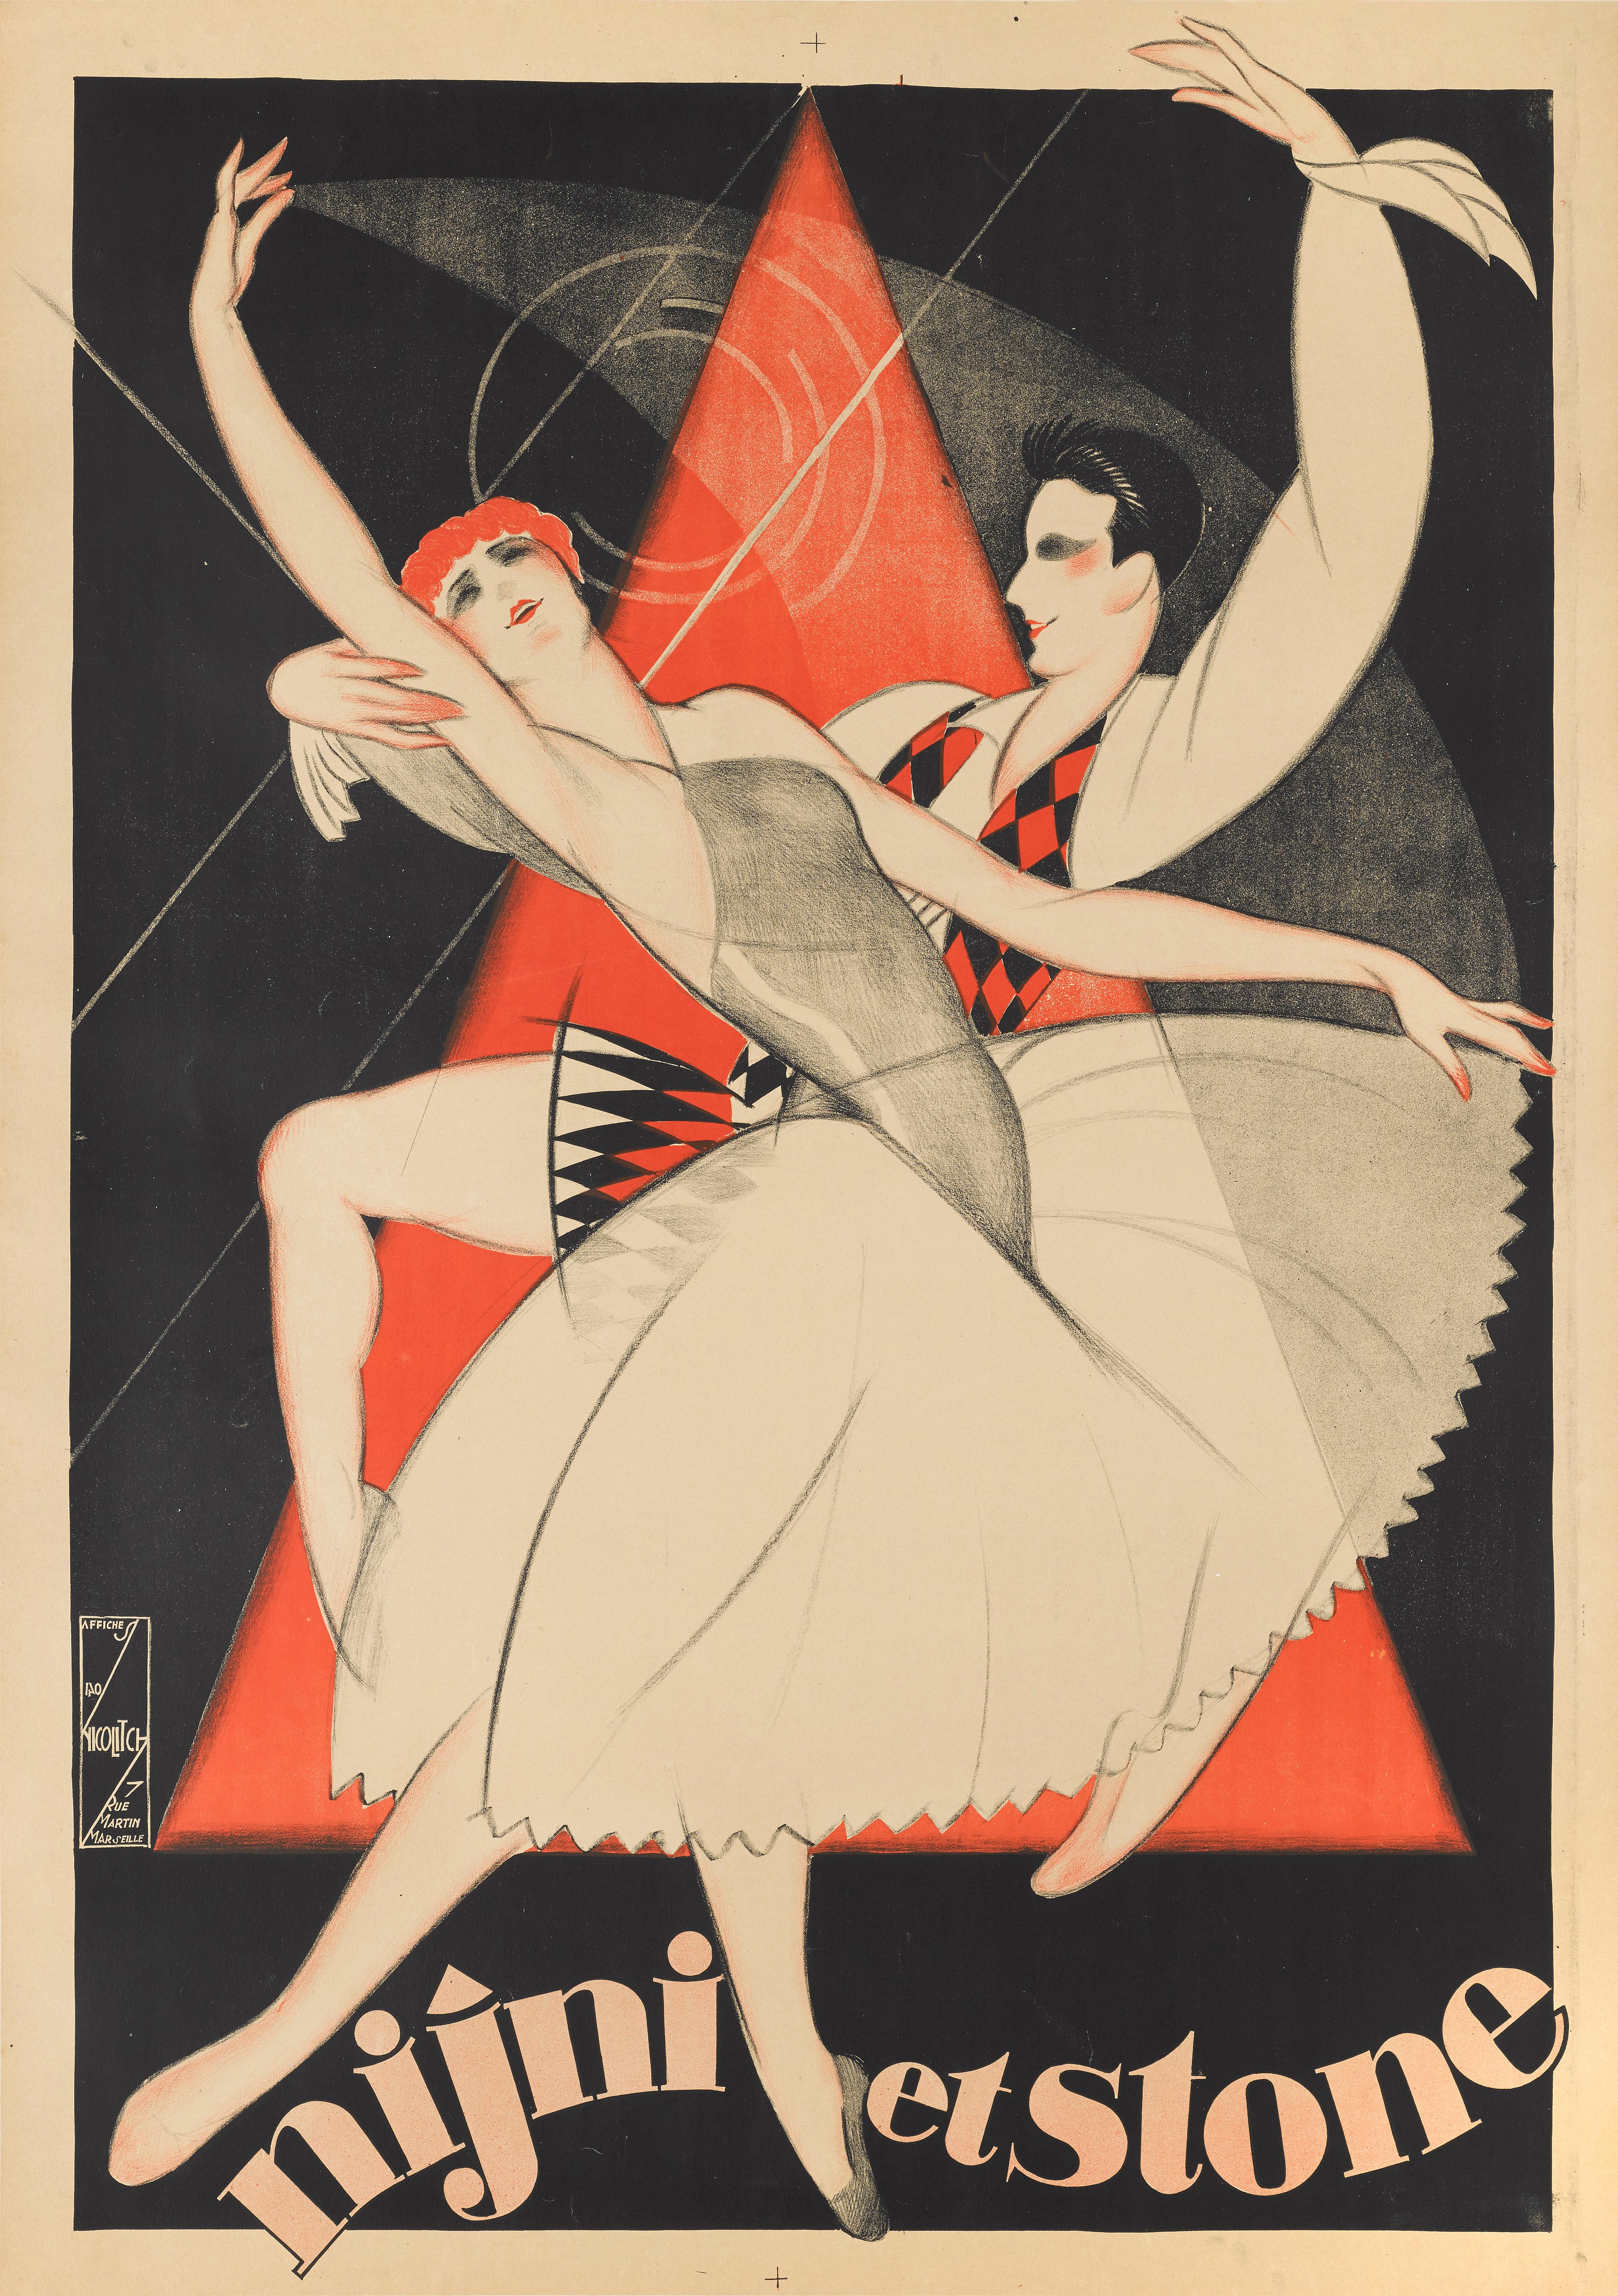 Original French poster for Nijni et Stone French ballet poster from the 1930s
This wonderful Art Deco design was created by Obrad Nicolitch (1898-1979) It is thought that the 